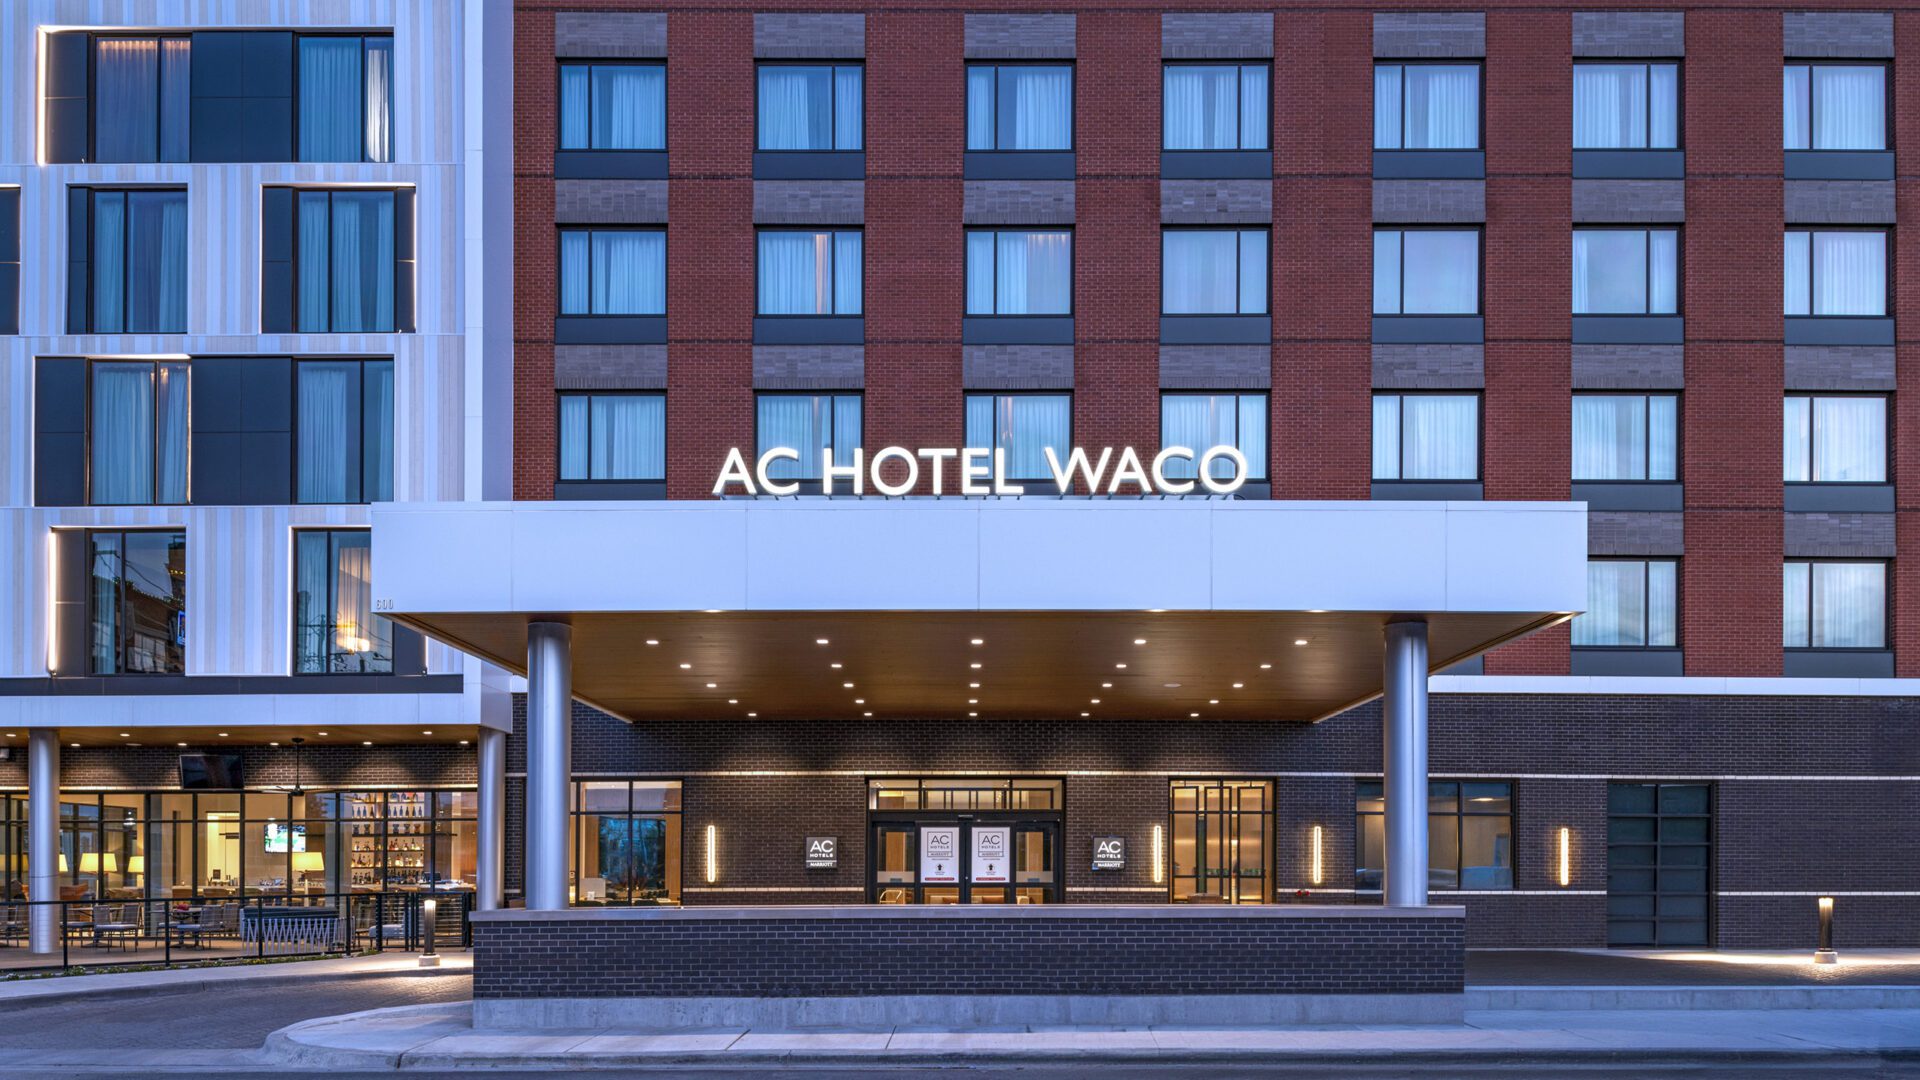 Hotel main entrance exterior with covered entryway and light up sign that reads "AC Hotel Waco"